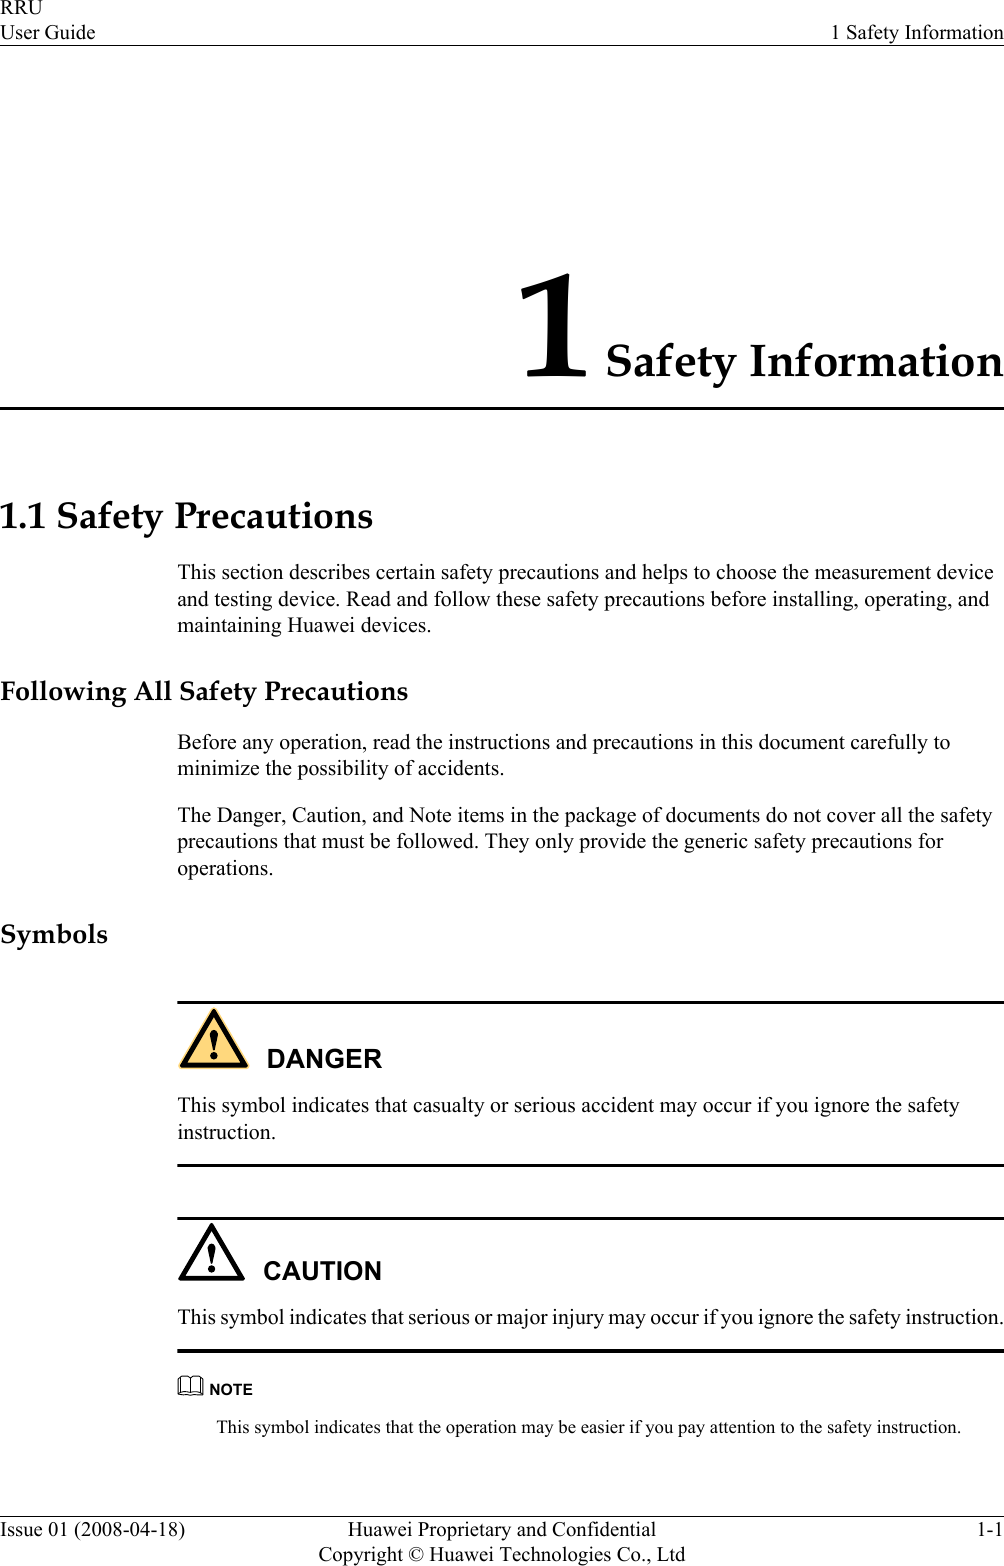 1 Safety Information1.1 Safety PrecautionsThis section describes certain safety precautions and helps to choose the measurement deviceand testing device. Read and follow these safety precautions before installing, operating, andmaintaining Huawei devices.Following All Safety PrecautionsBefore any operation, read the instructions and precautions in this document carefully tominimize the possibility of accidents.The Danger, Caution, and Note items in the package of documents do not cover all the safetyprecautions that must be followed. They only provide the generic safety precautions foroperations.SymbolsDANGERThis symbol indicates that casualty or serious accident may occur if you ignore the safetyinstruction.CAUTIONThis symbol indicates that serious or major injury may occur if you ignore the safety instruction.NOTEThis symbol indicates that the operation may be easier if you pay attention to the safety instruction.RRUUser Guide 1 Safety InformationIssue 01 (2008-04-18) Huawei Proprietary and ConfidentialCopyright © Huawei Technologies Co., Ltd1-1